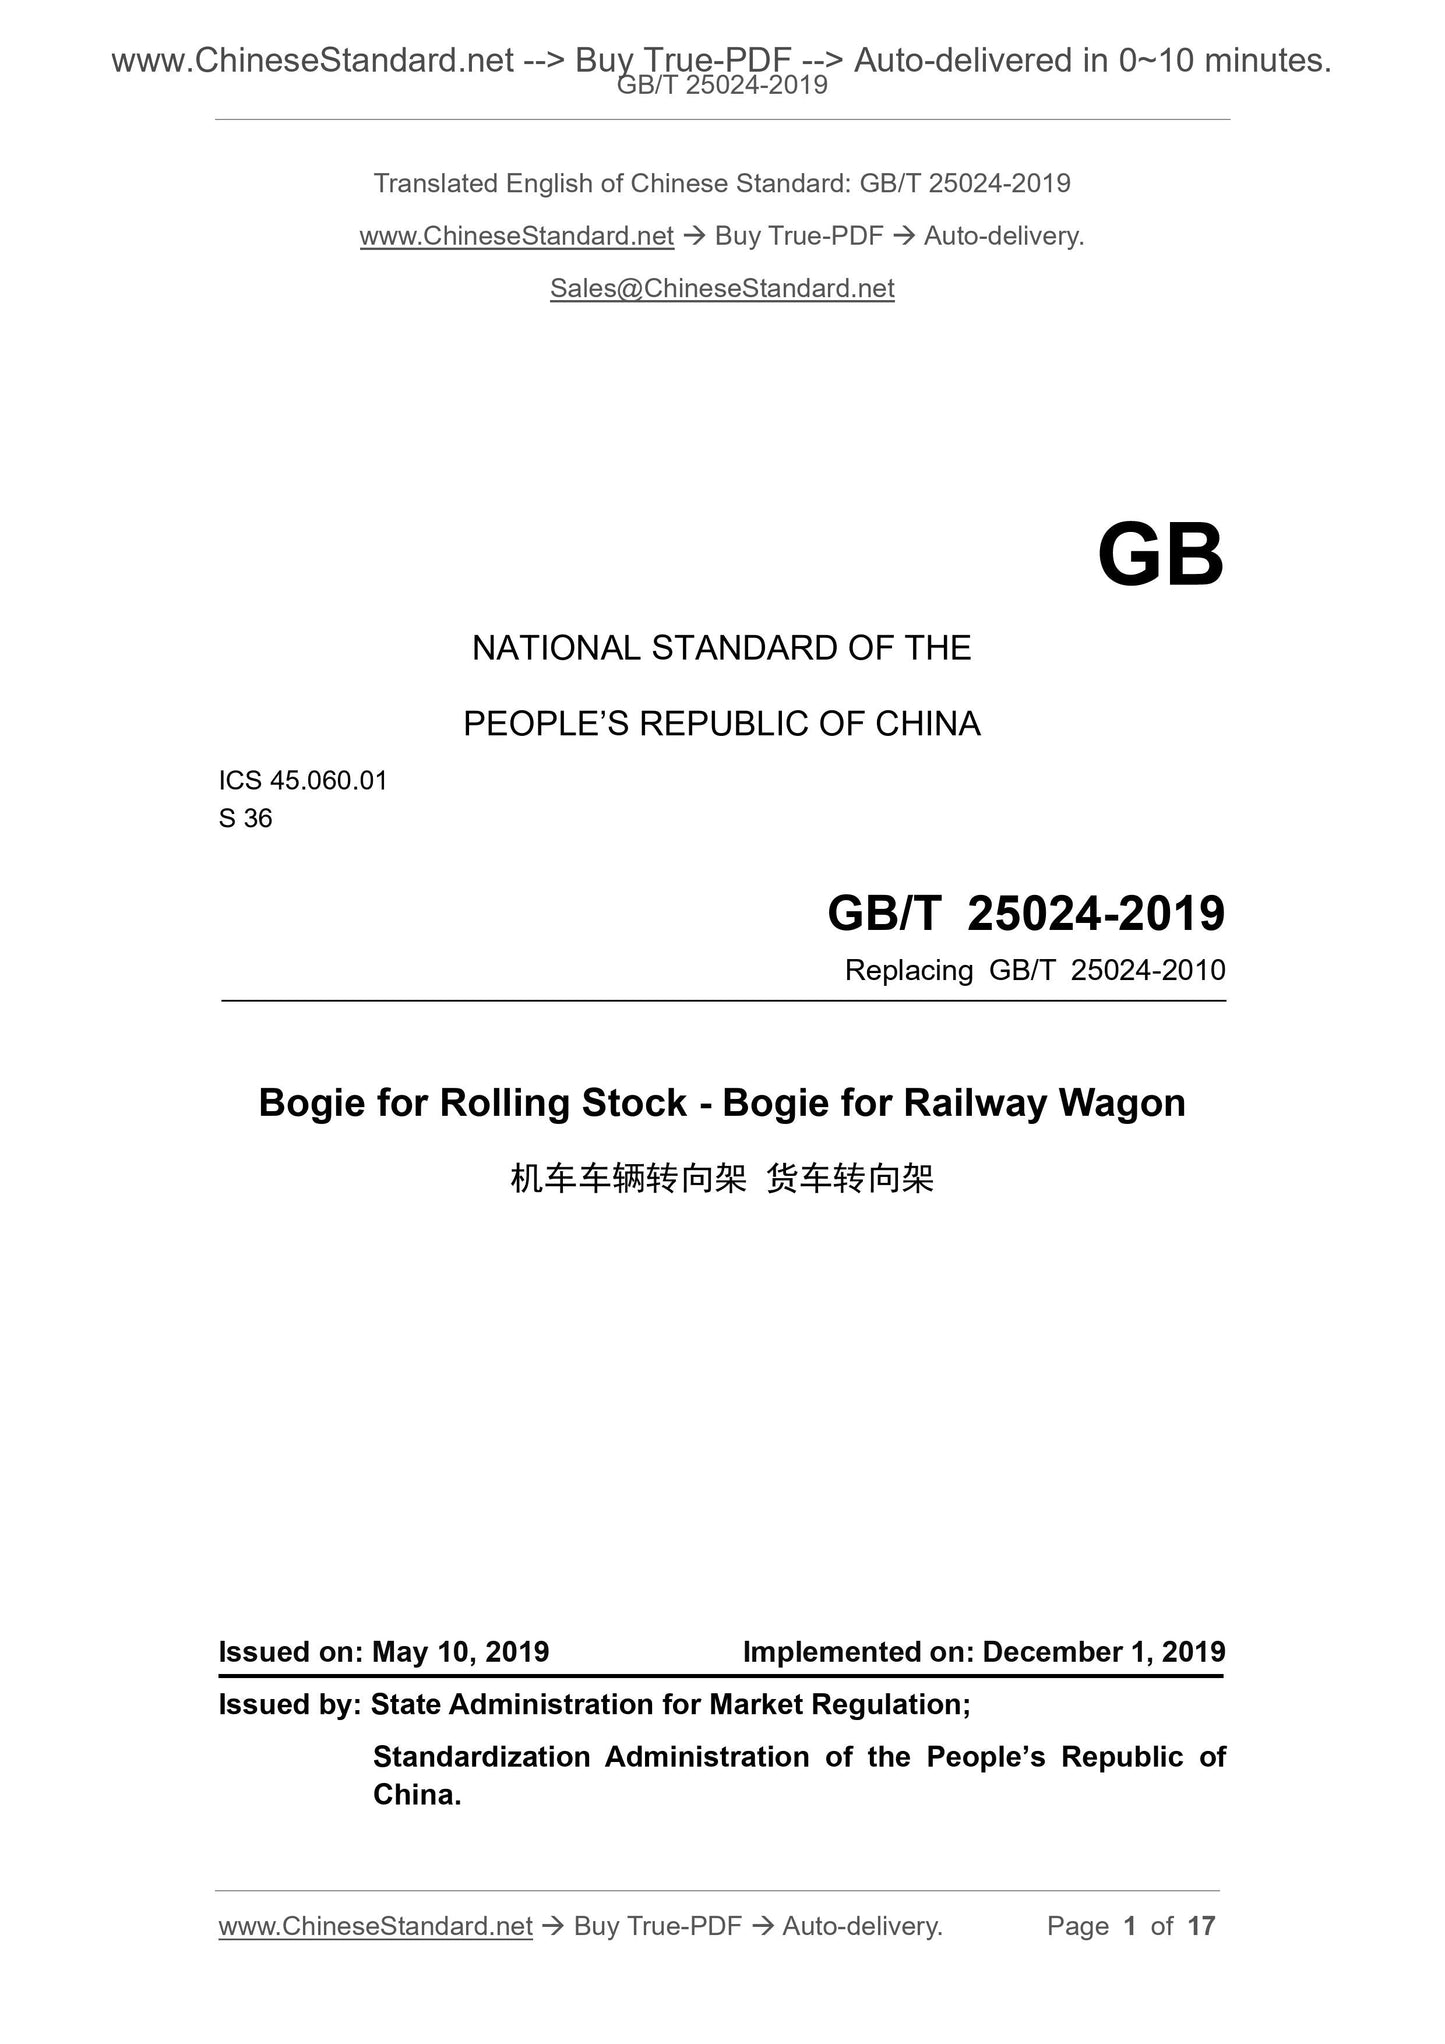 GB/T 25024-2019 Page 1